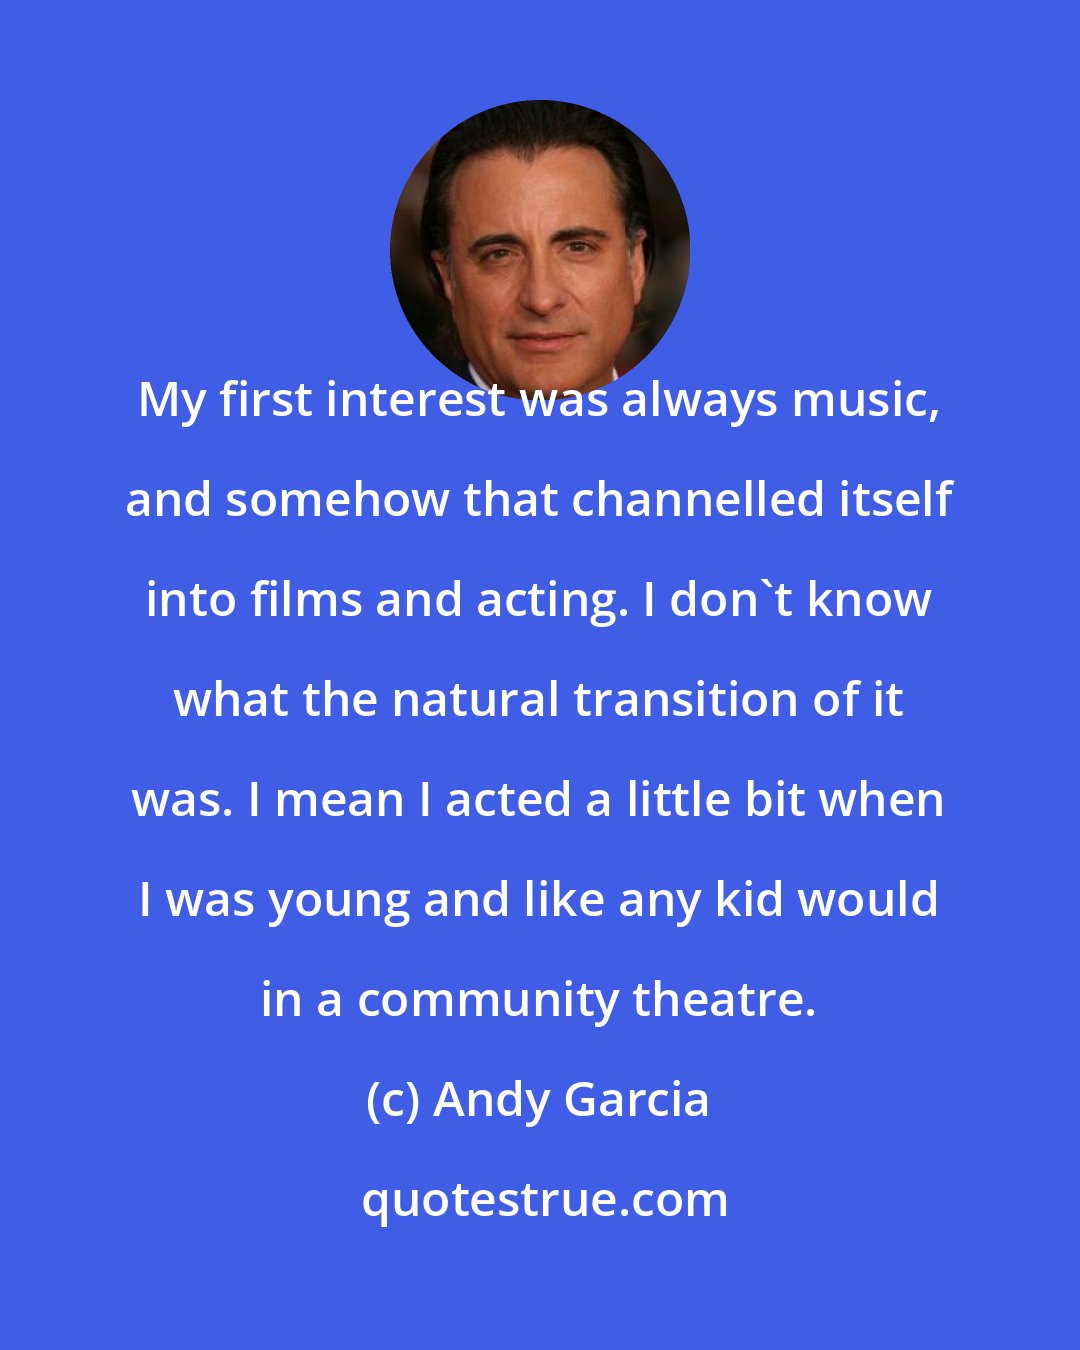 Andy Garcia: My first interest was always music, and somehow that channelled itself into films and acting. I don't know what the natural transition of it was. I mean I acted a little bit when I was young and like any kid would in a community theatre.